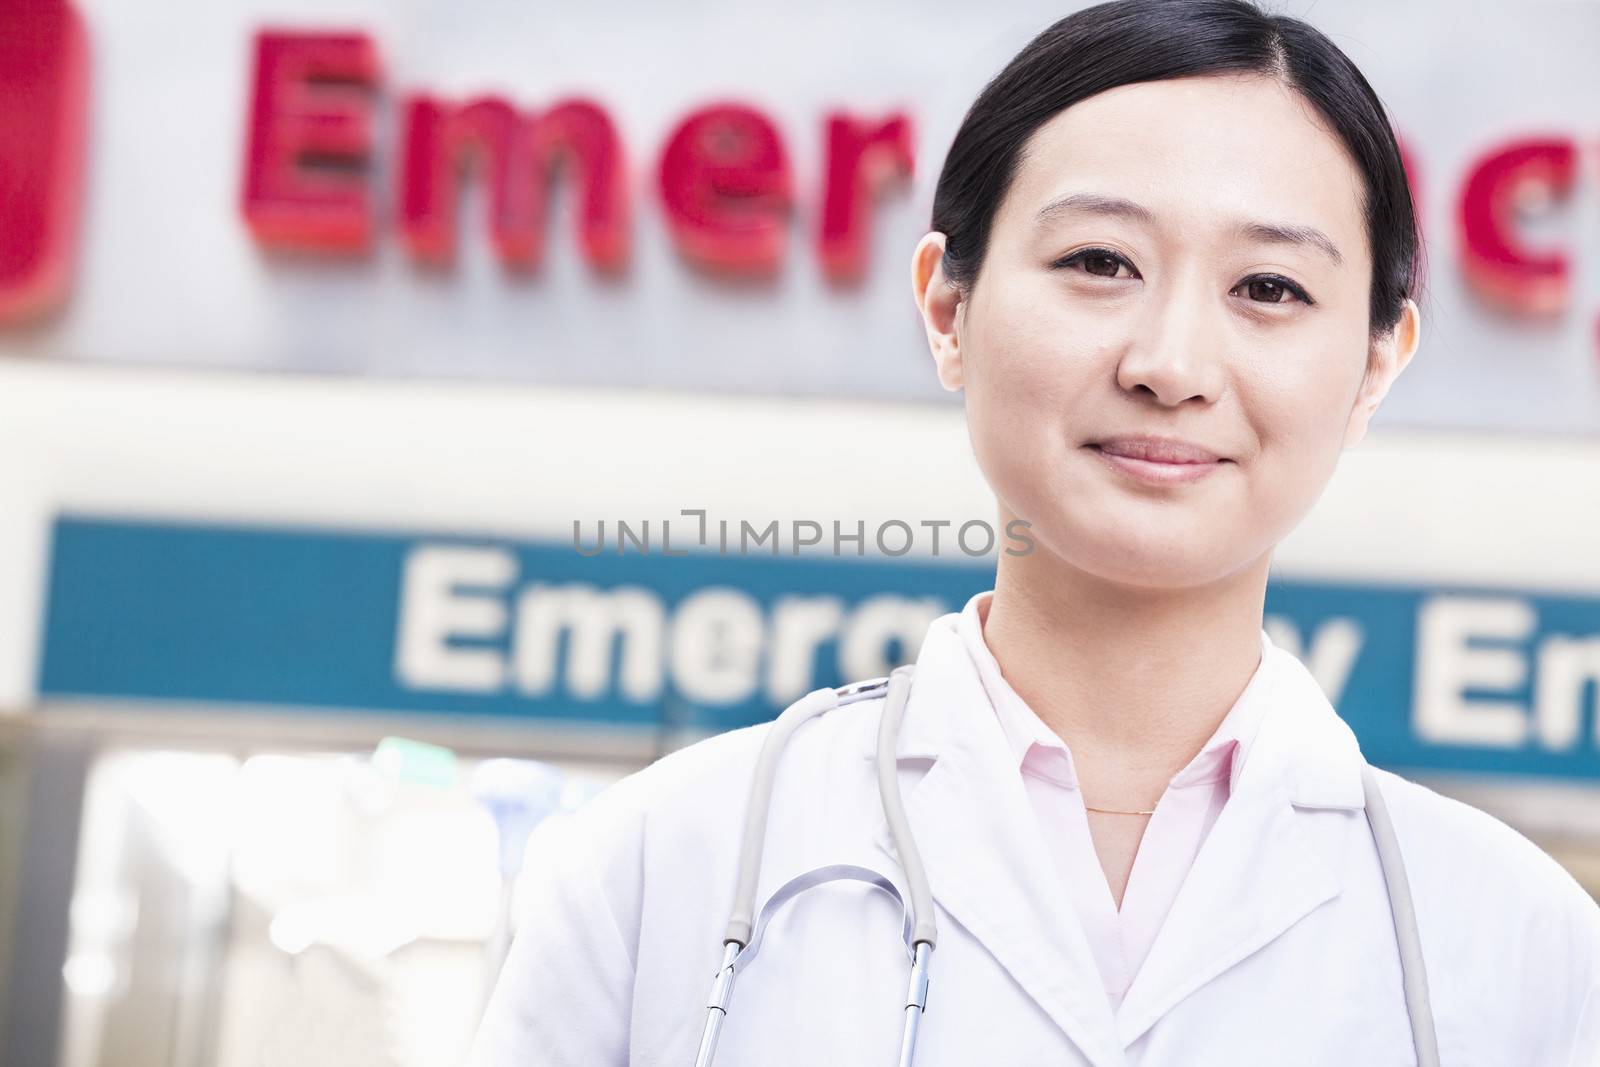 Portrait of smiling female doctor outside of the hospital, emergency room sign in the background